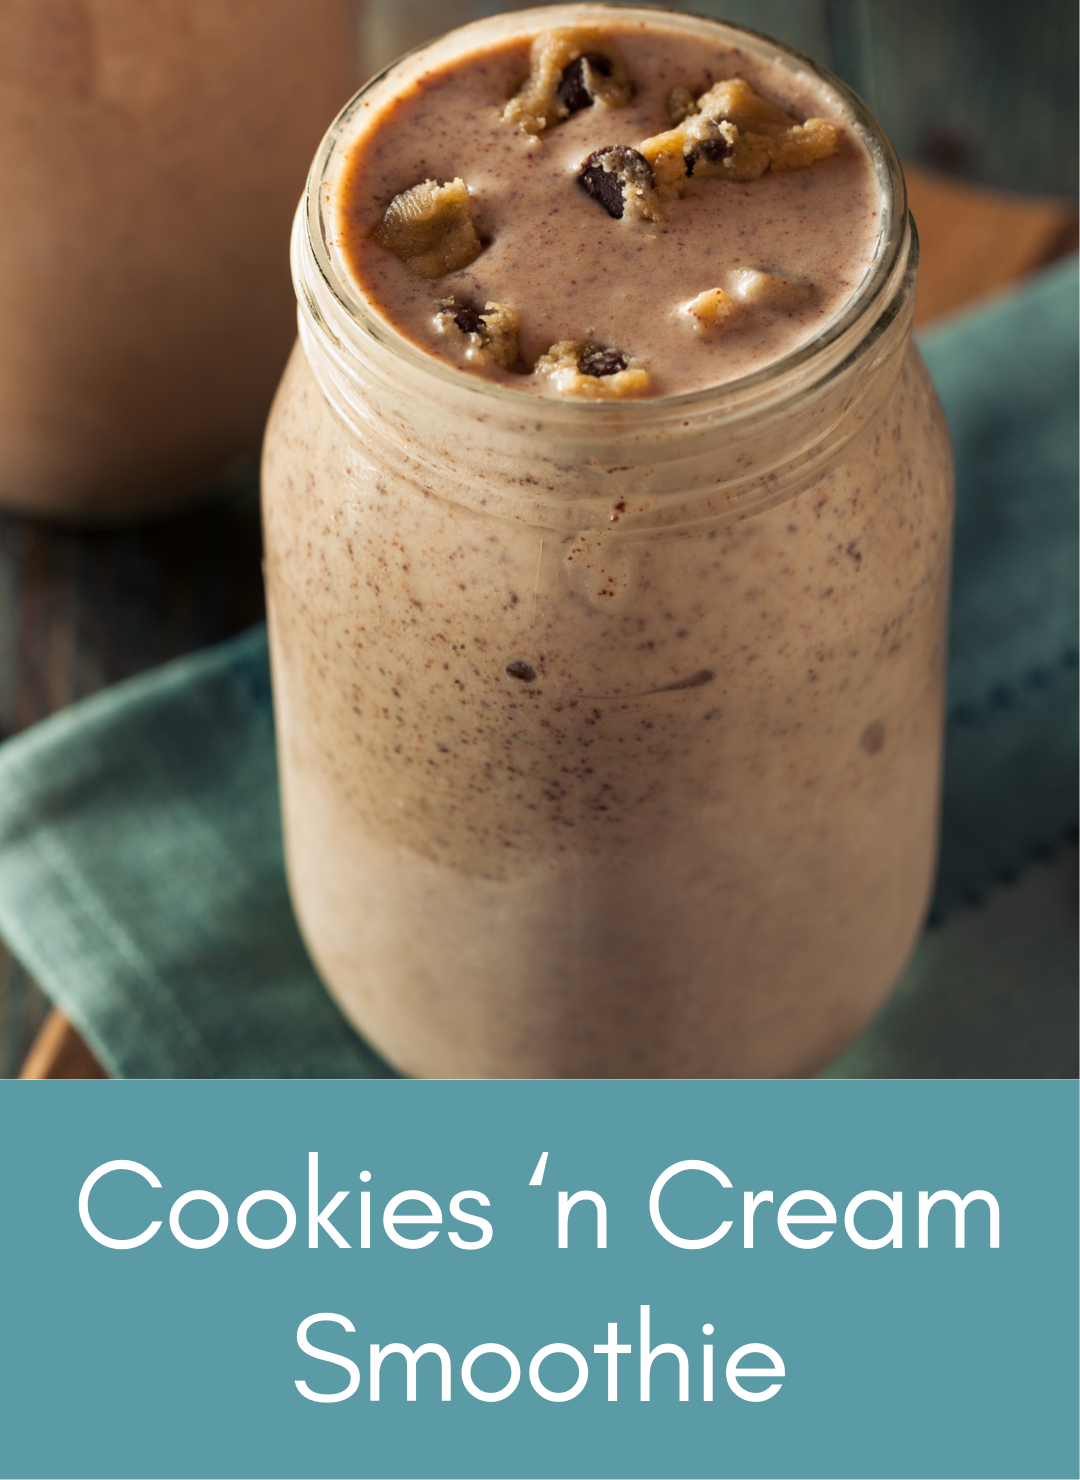 Cookie and cream whole food plant based smoothie Picture with link to recipe